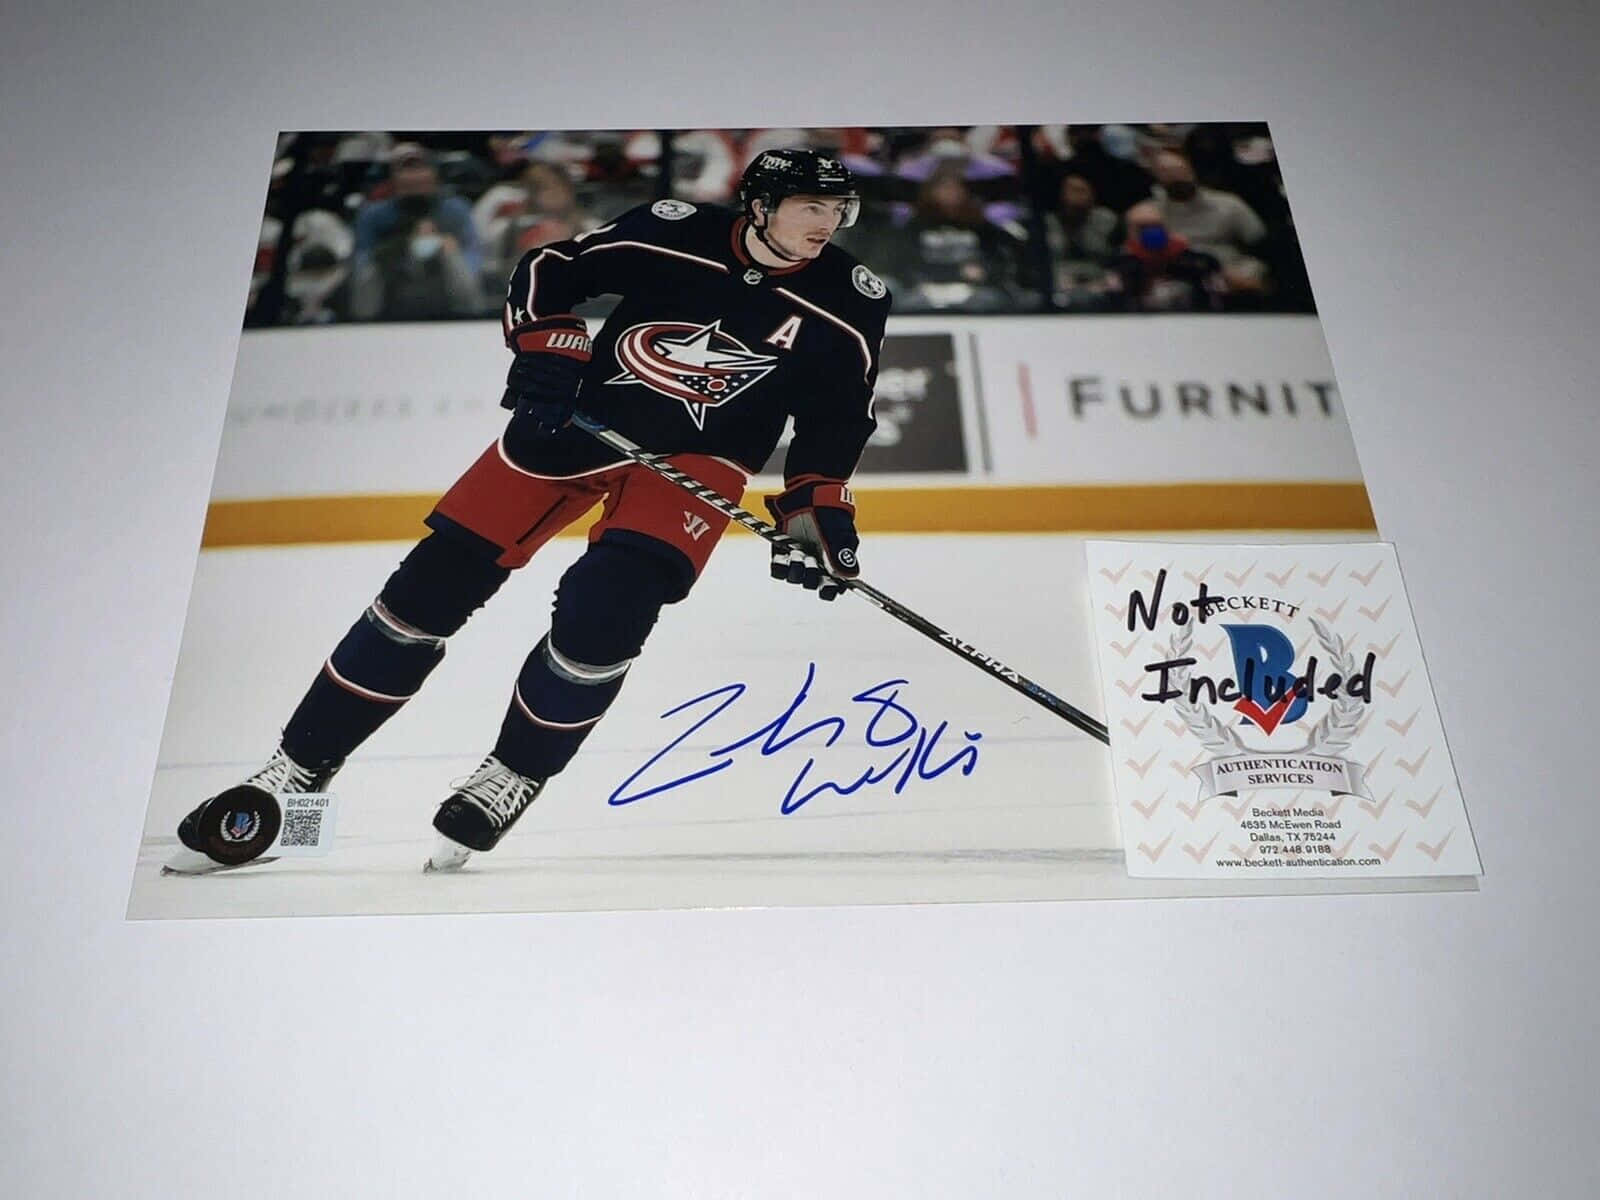 Signed Poster of Zachary Werenski on Wall Wallpaper